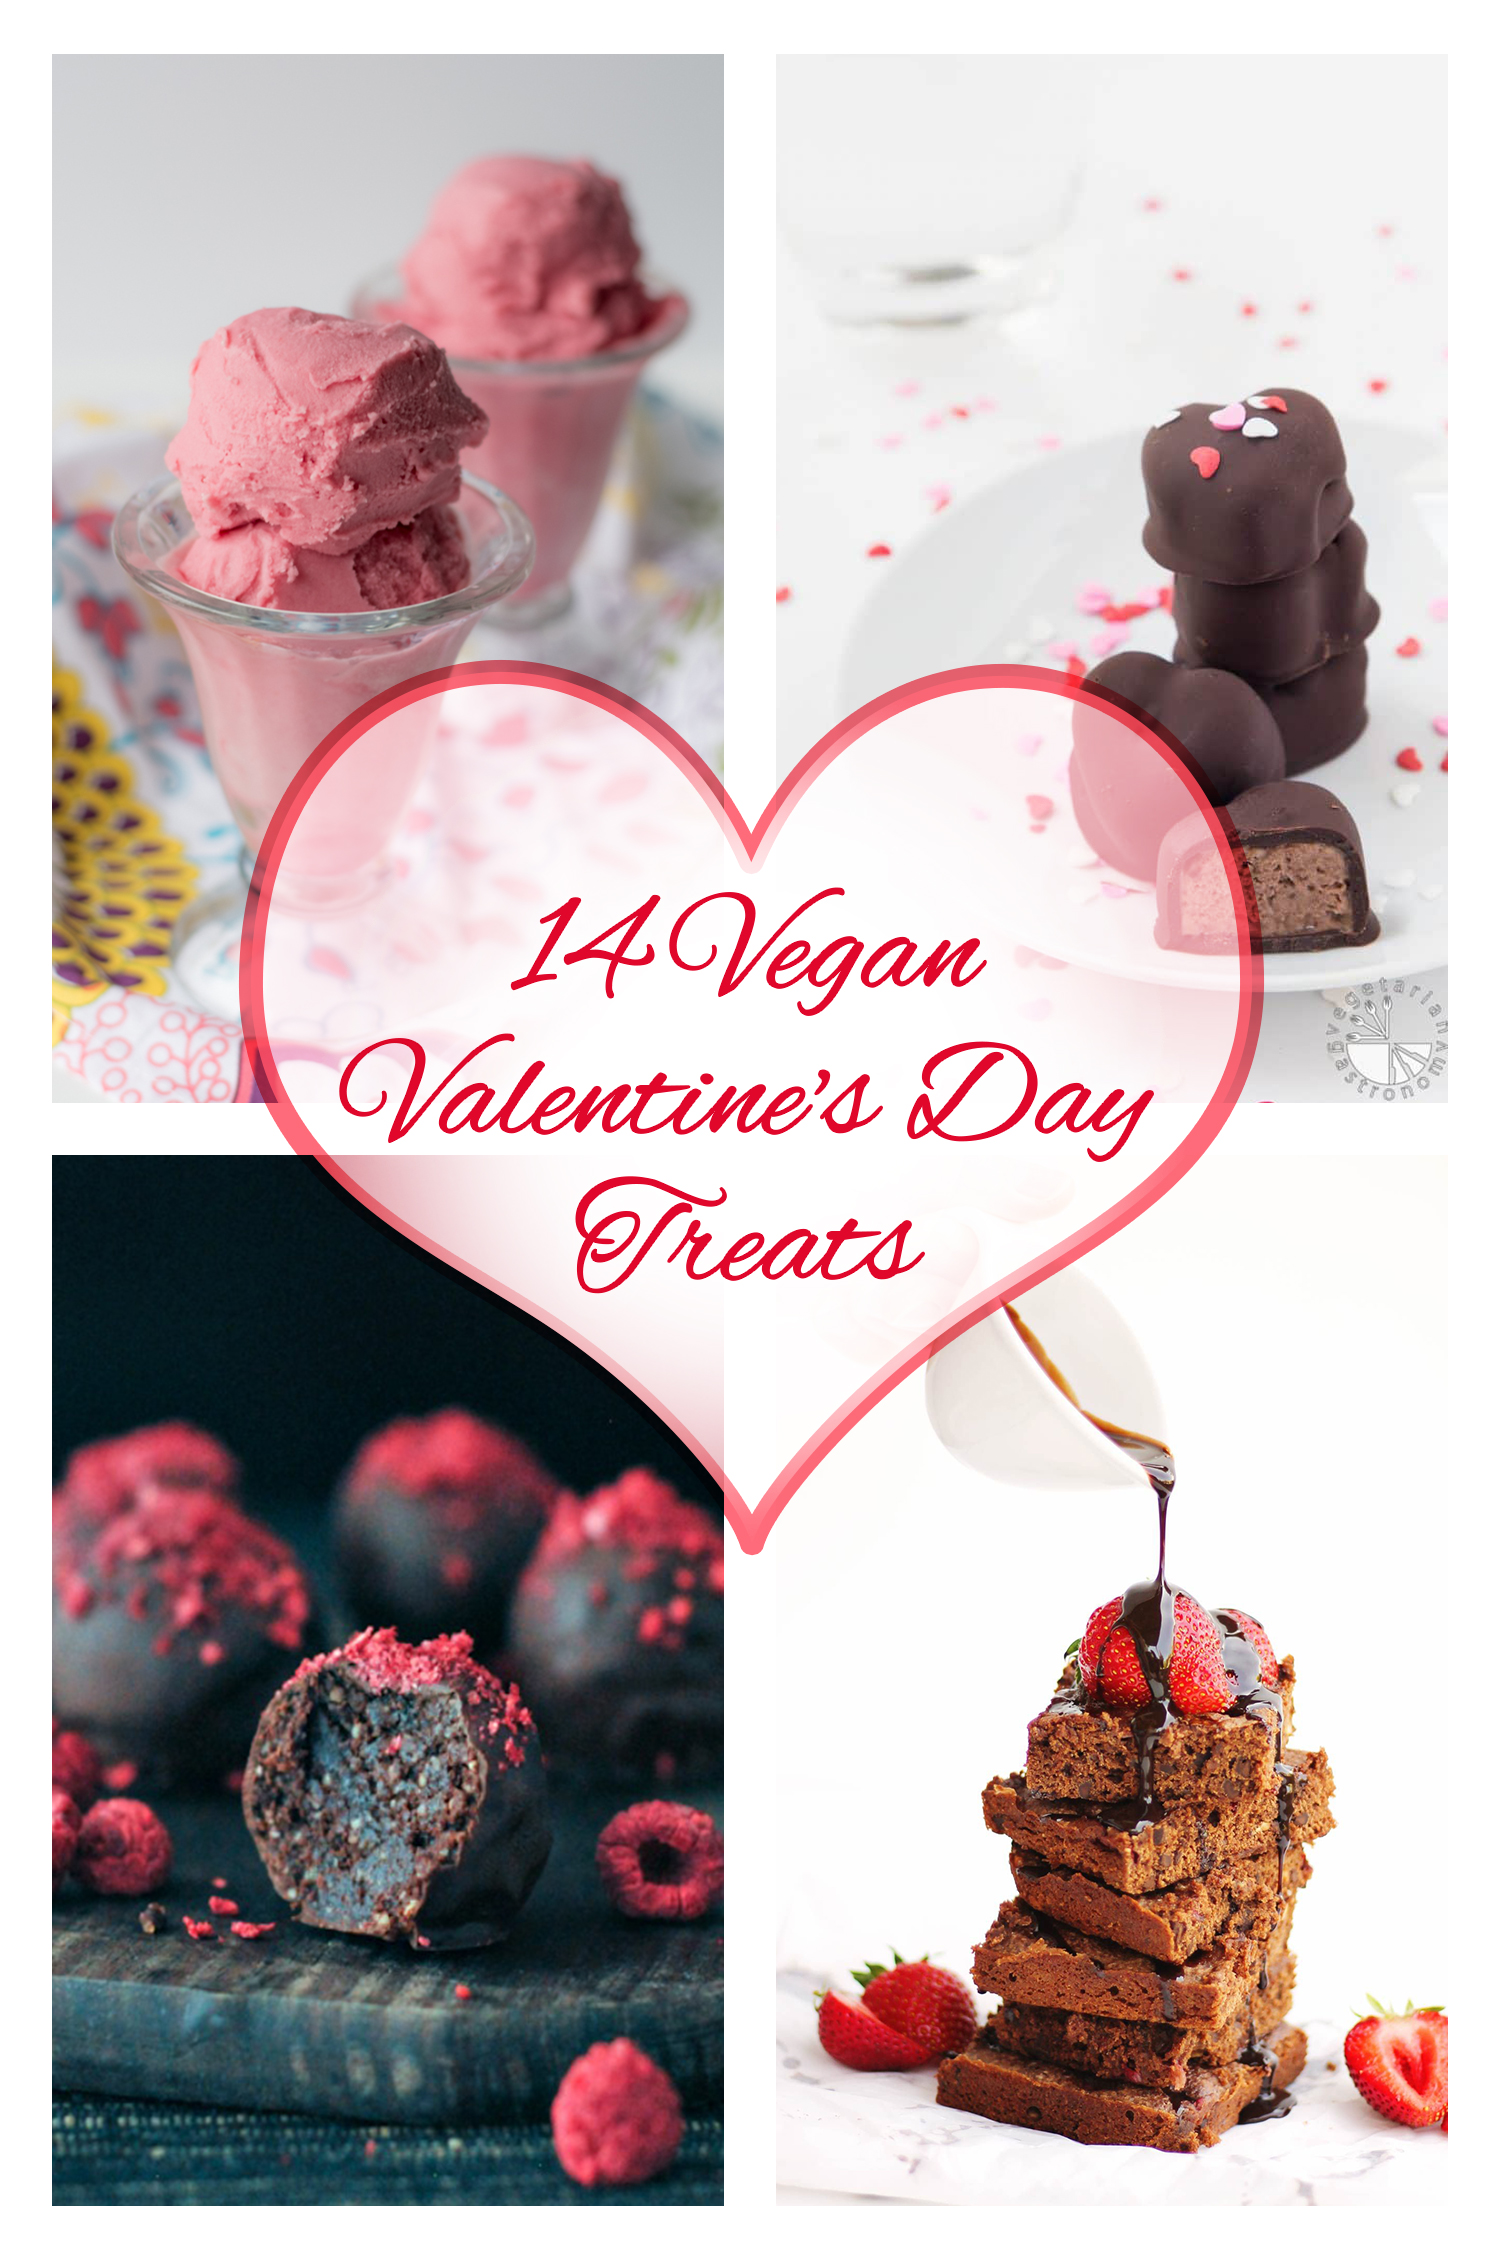 If you’re looking for sweet vegan treats for Valentine’s Day, this is the right post for you! Your loved ones will love these delicious 14 Vegan Valentine's Day Treats. #vegan #valentine's #holiday #desserts #recipes #treats #dairyfree 